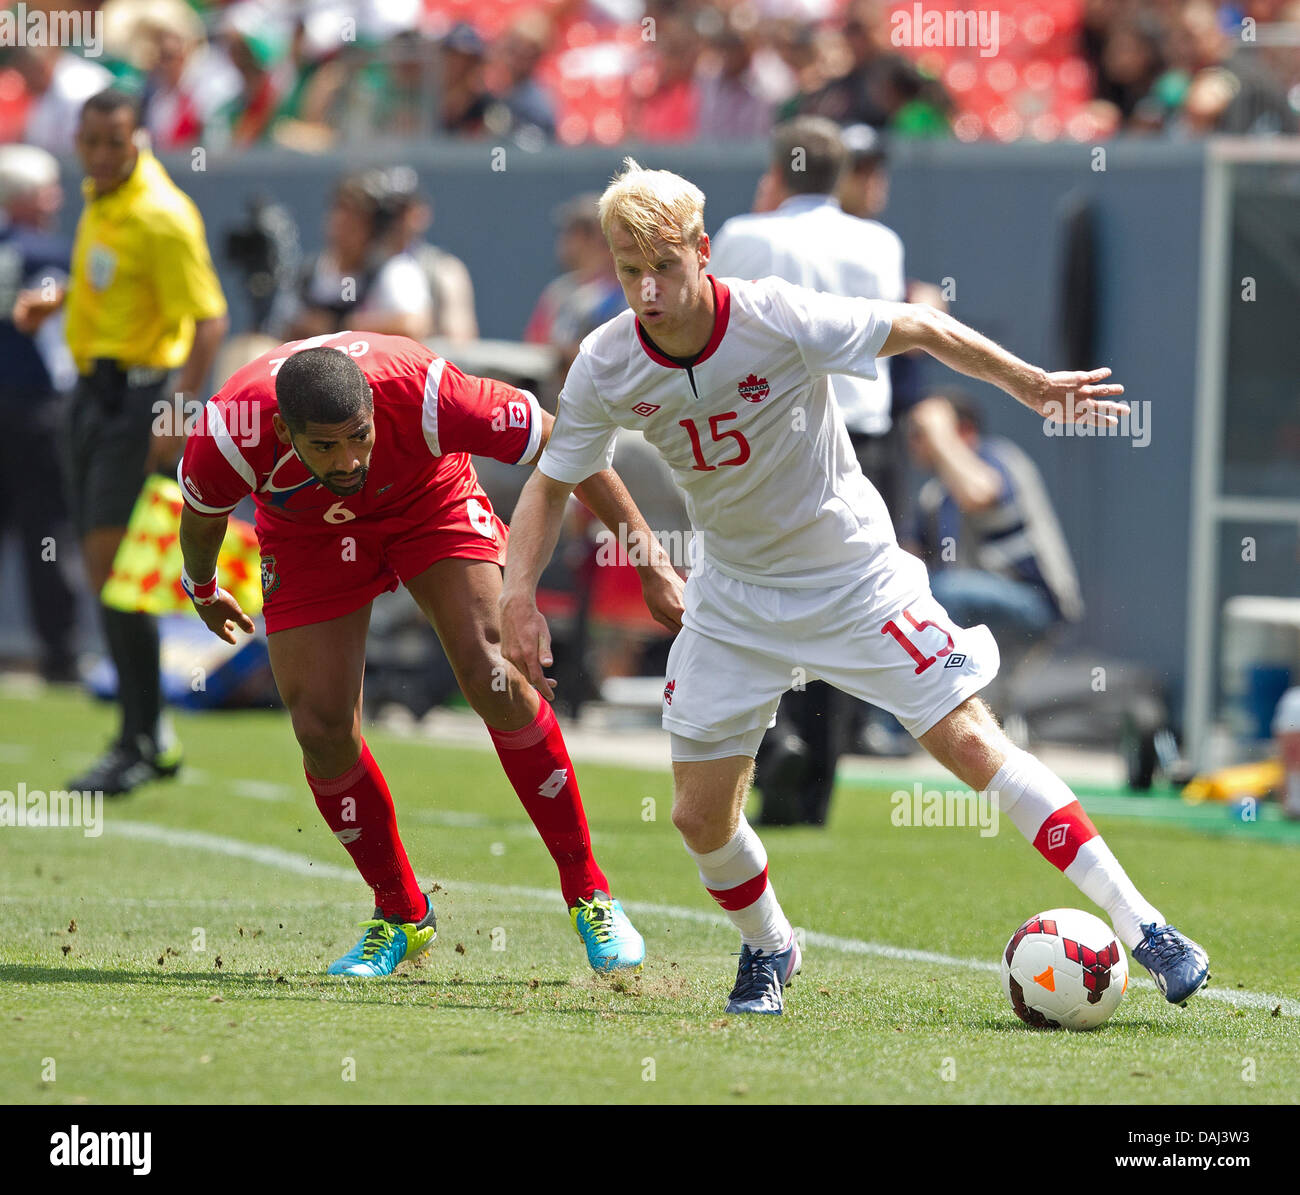 Denver, Colorado, USA. 14th July, 2013. Canada's KYLE BEKKER, right, dribbles around Panama's GABRIEL GOMEZ, left, during the 1st. half at Sports Authority Field at Mile High Sunday afternoon. Panama and Canada Draw 0-0. Credit:  Hector Acevedo/ZUMAPRESS.com/Alamy Live News Stock Photo